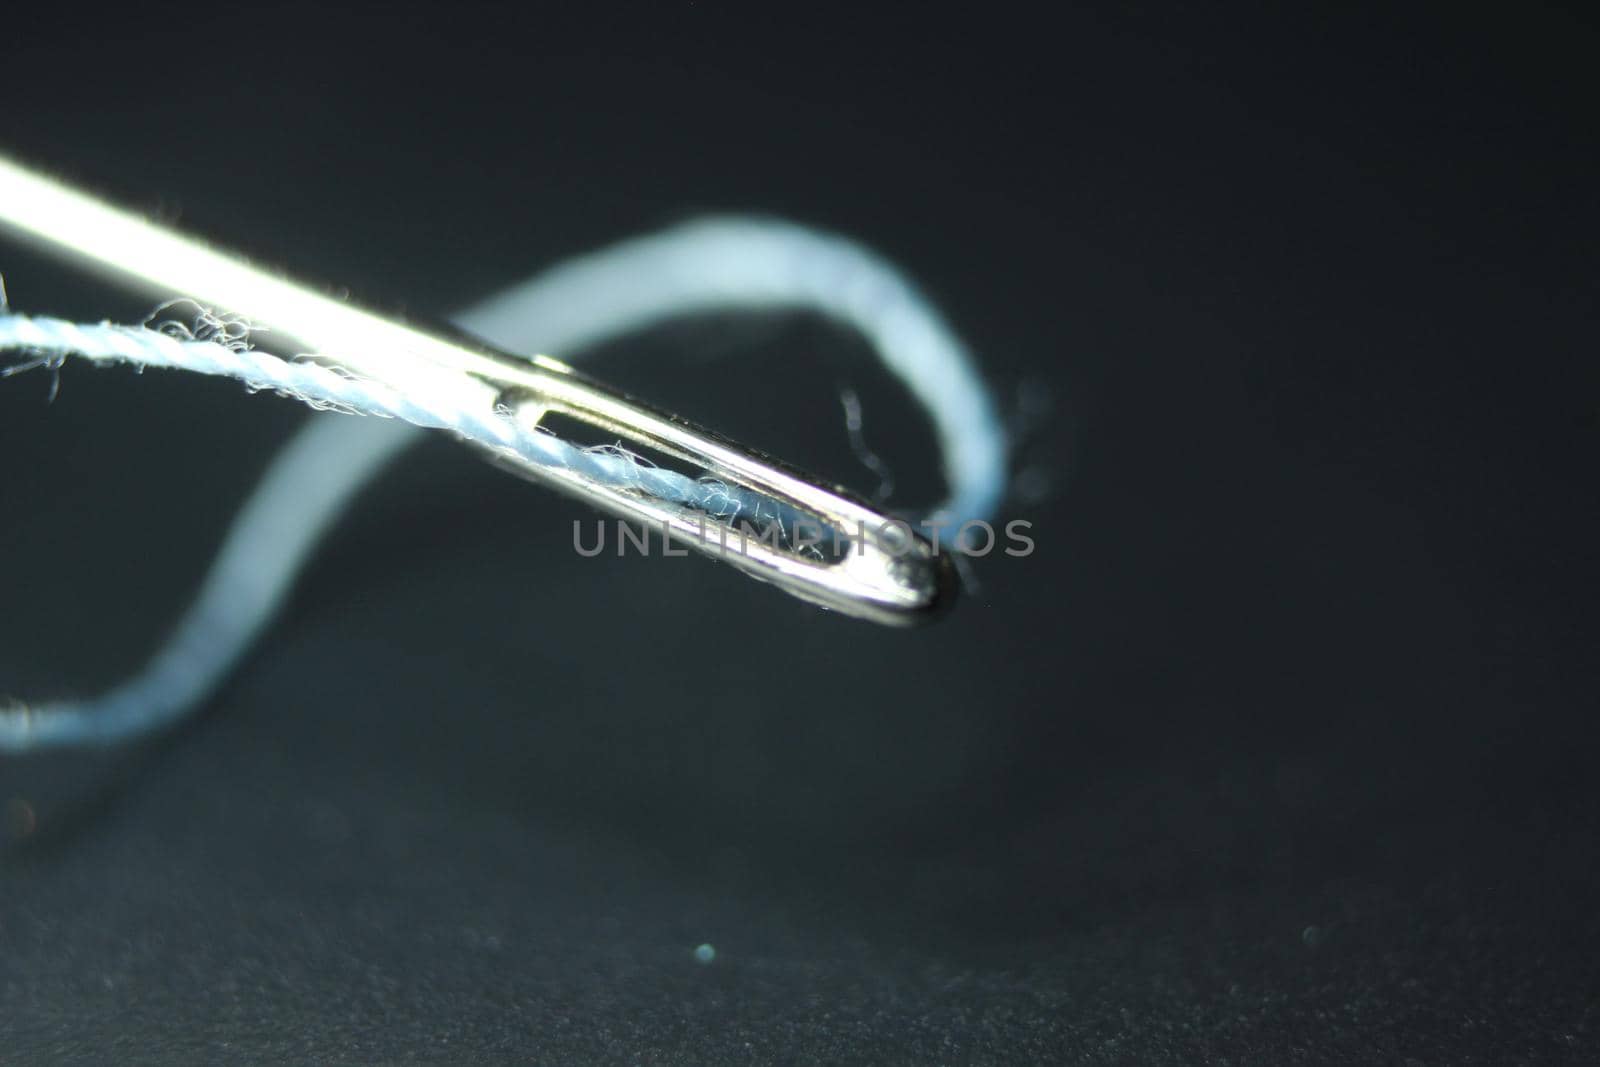 Macro photograph of sewing needle. Small needle with thread in the eyelet, isolated over the black background.